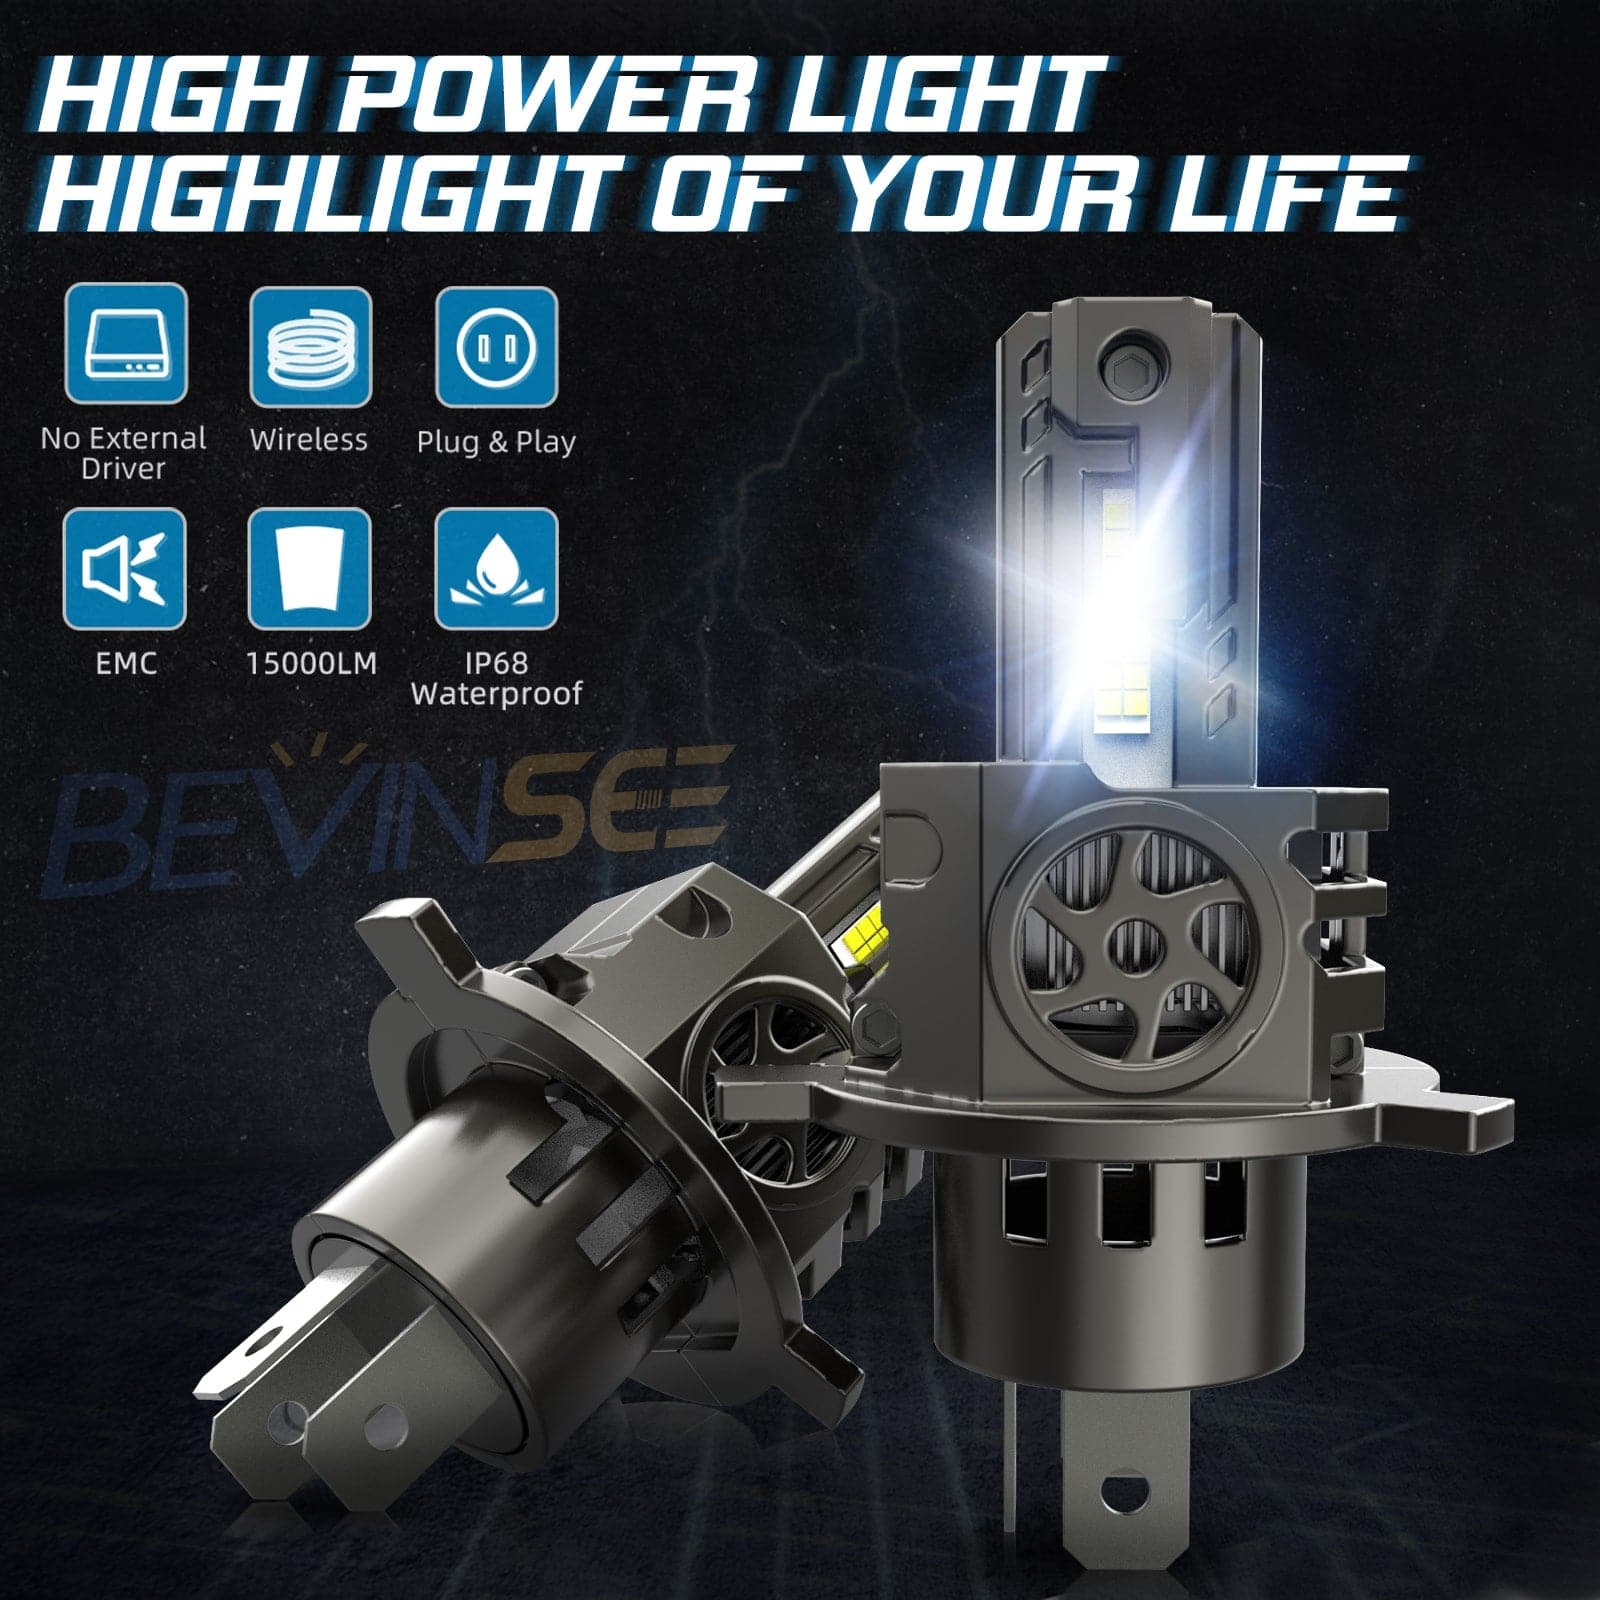 BEVINSEE S550 H4 HS1 9003 LED Headlight Bulbs Motorcycle Lamps 100W 10000lm